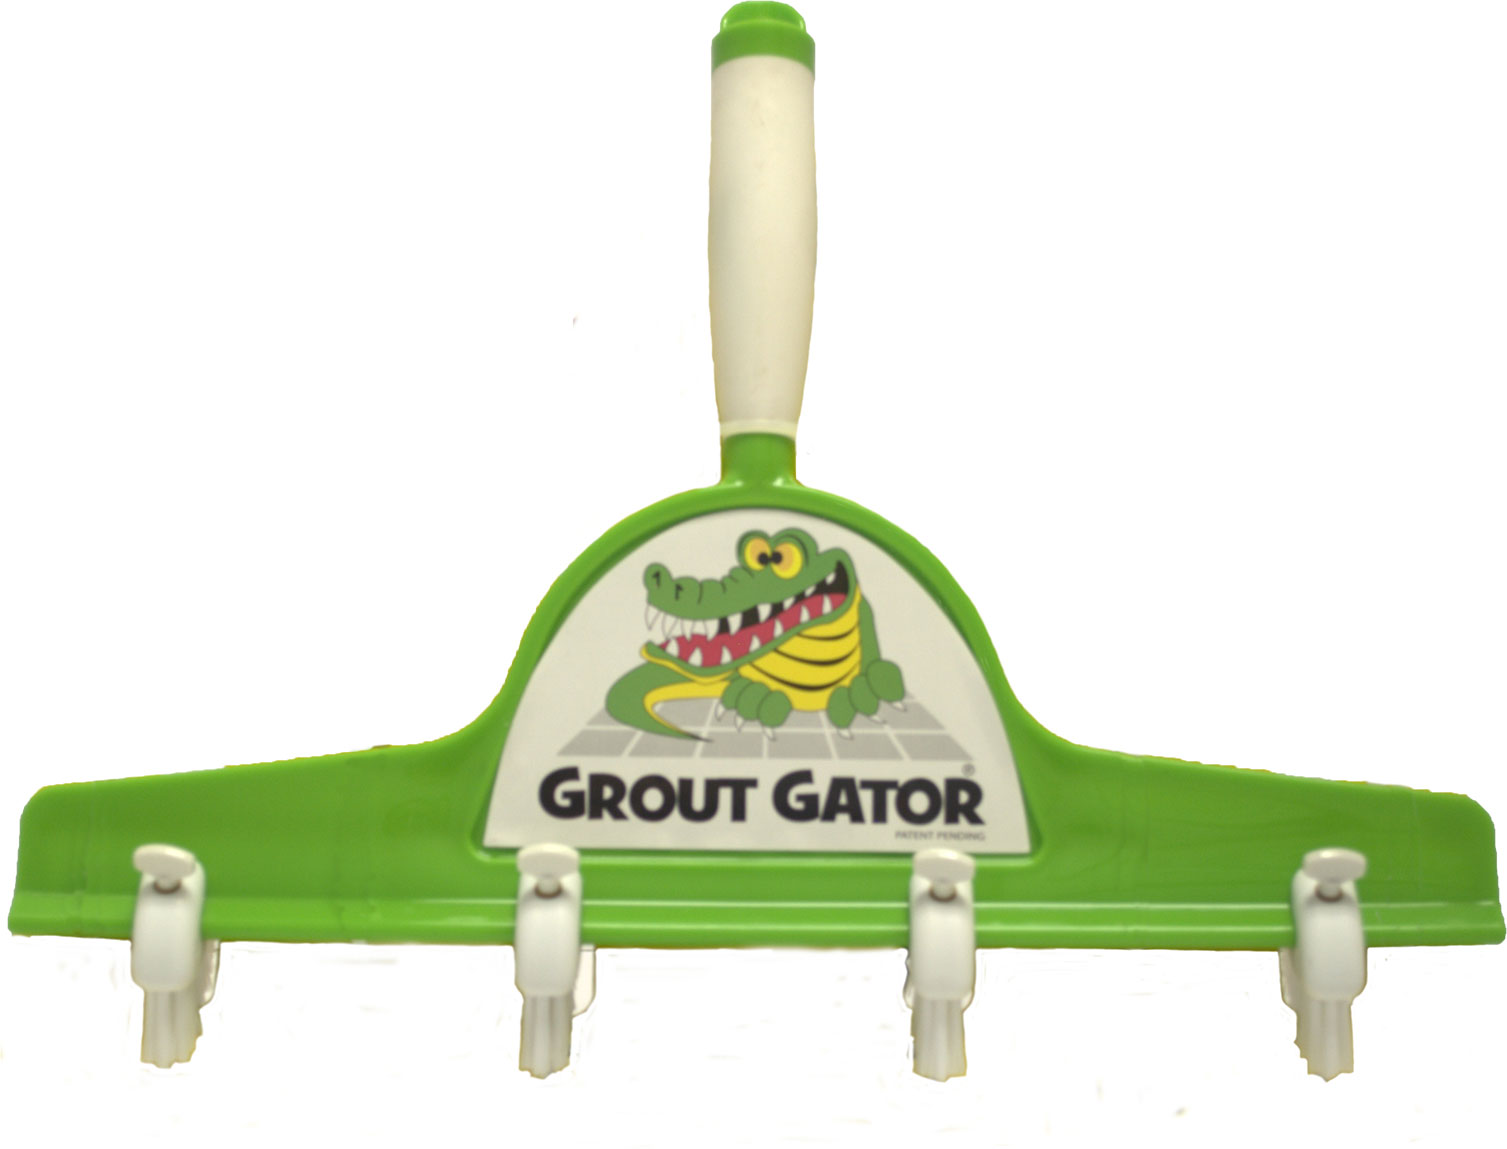 https://englesideproducts.com/wp-content/uploads/2016/04/4.16.16-Grout-Gator-sm.jpg